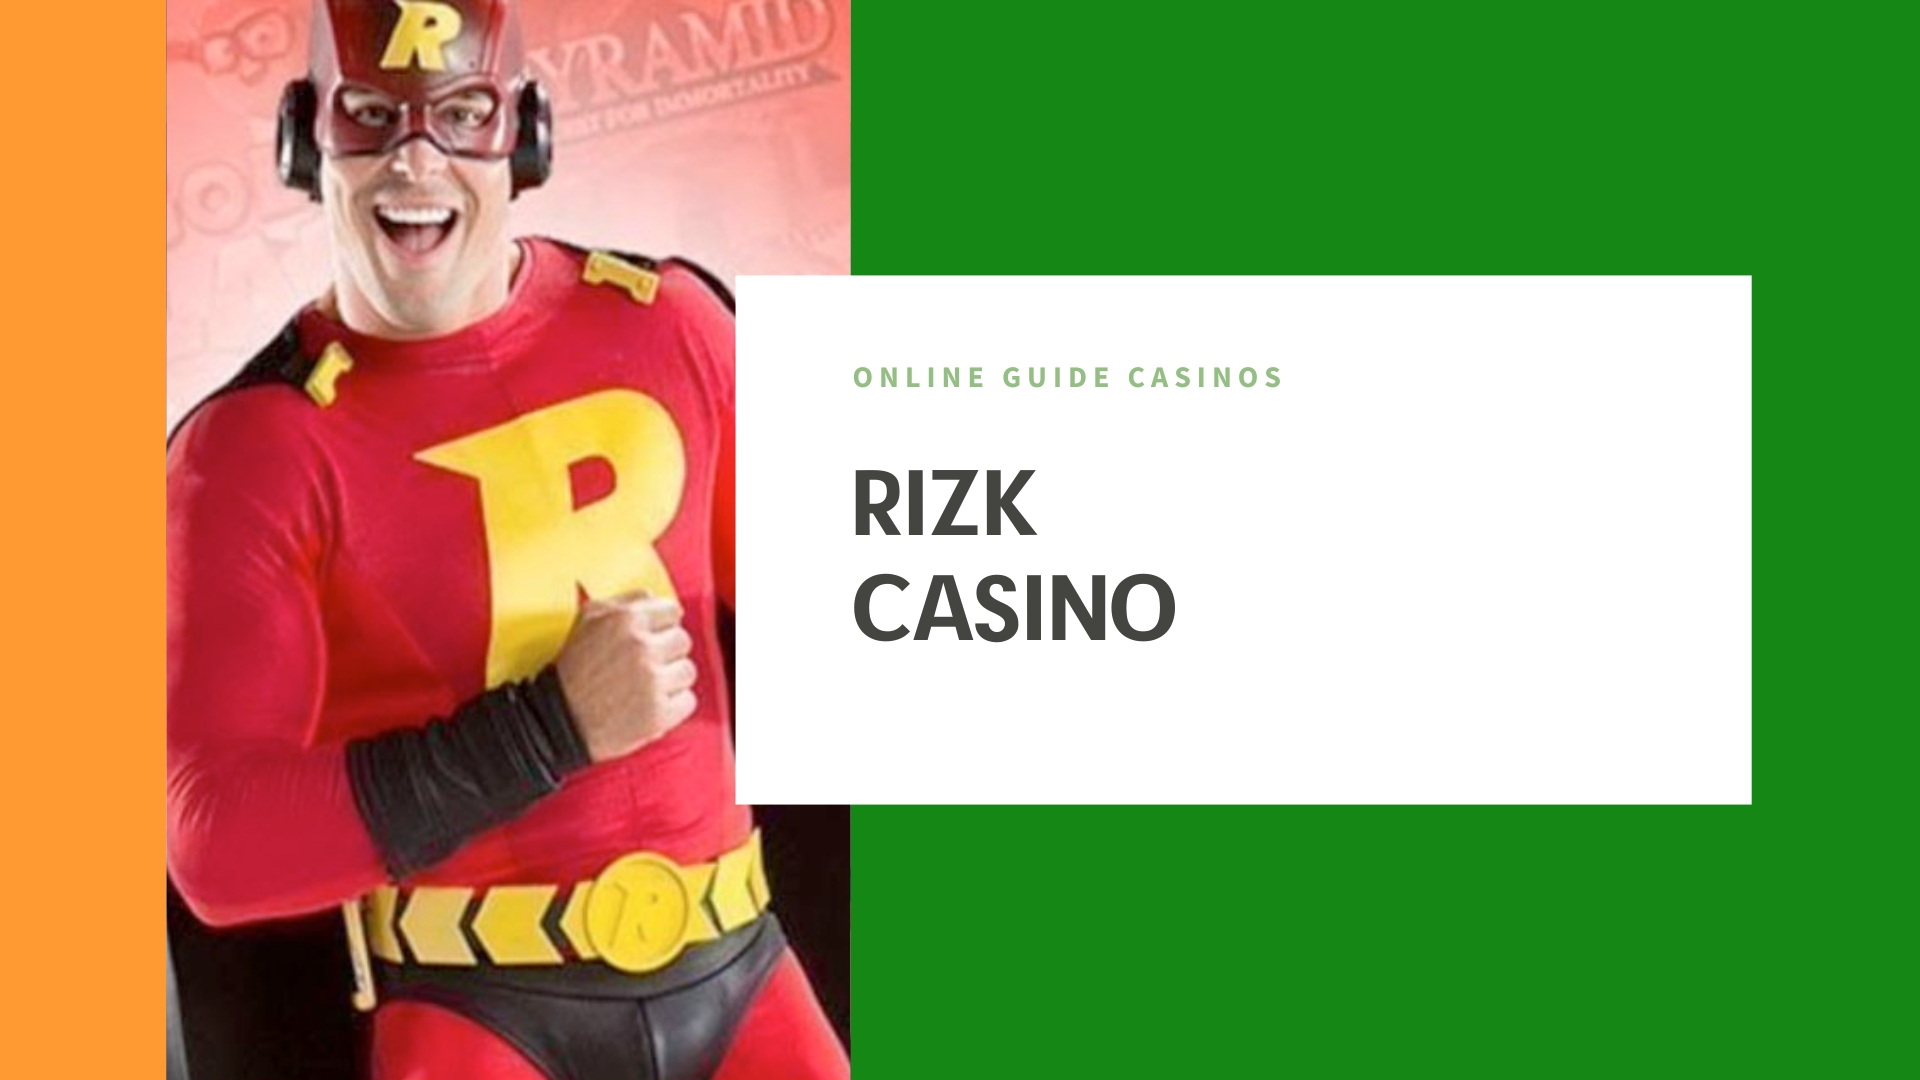 Take a chance and win with Rizk Casino!